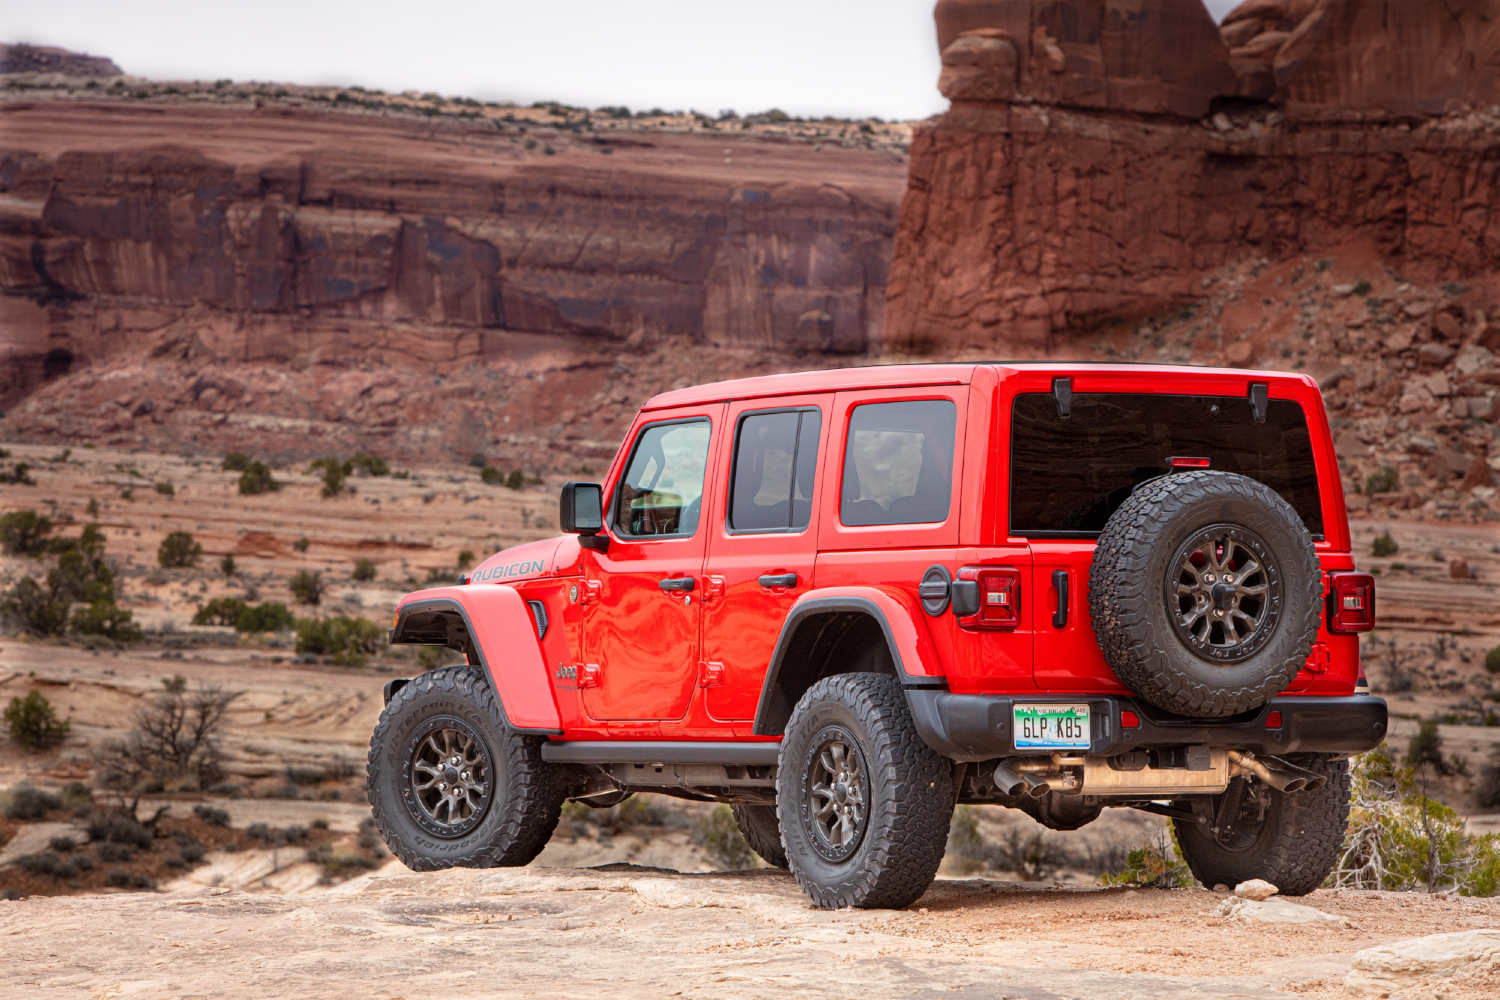 The Jeep Wrangler Unlimited Rubicon 392